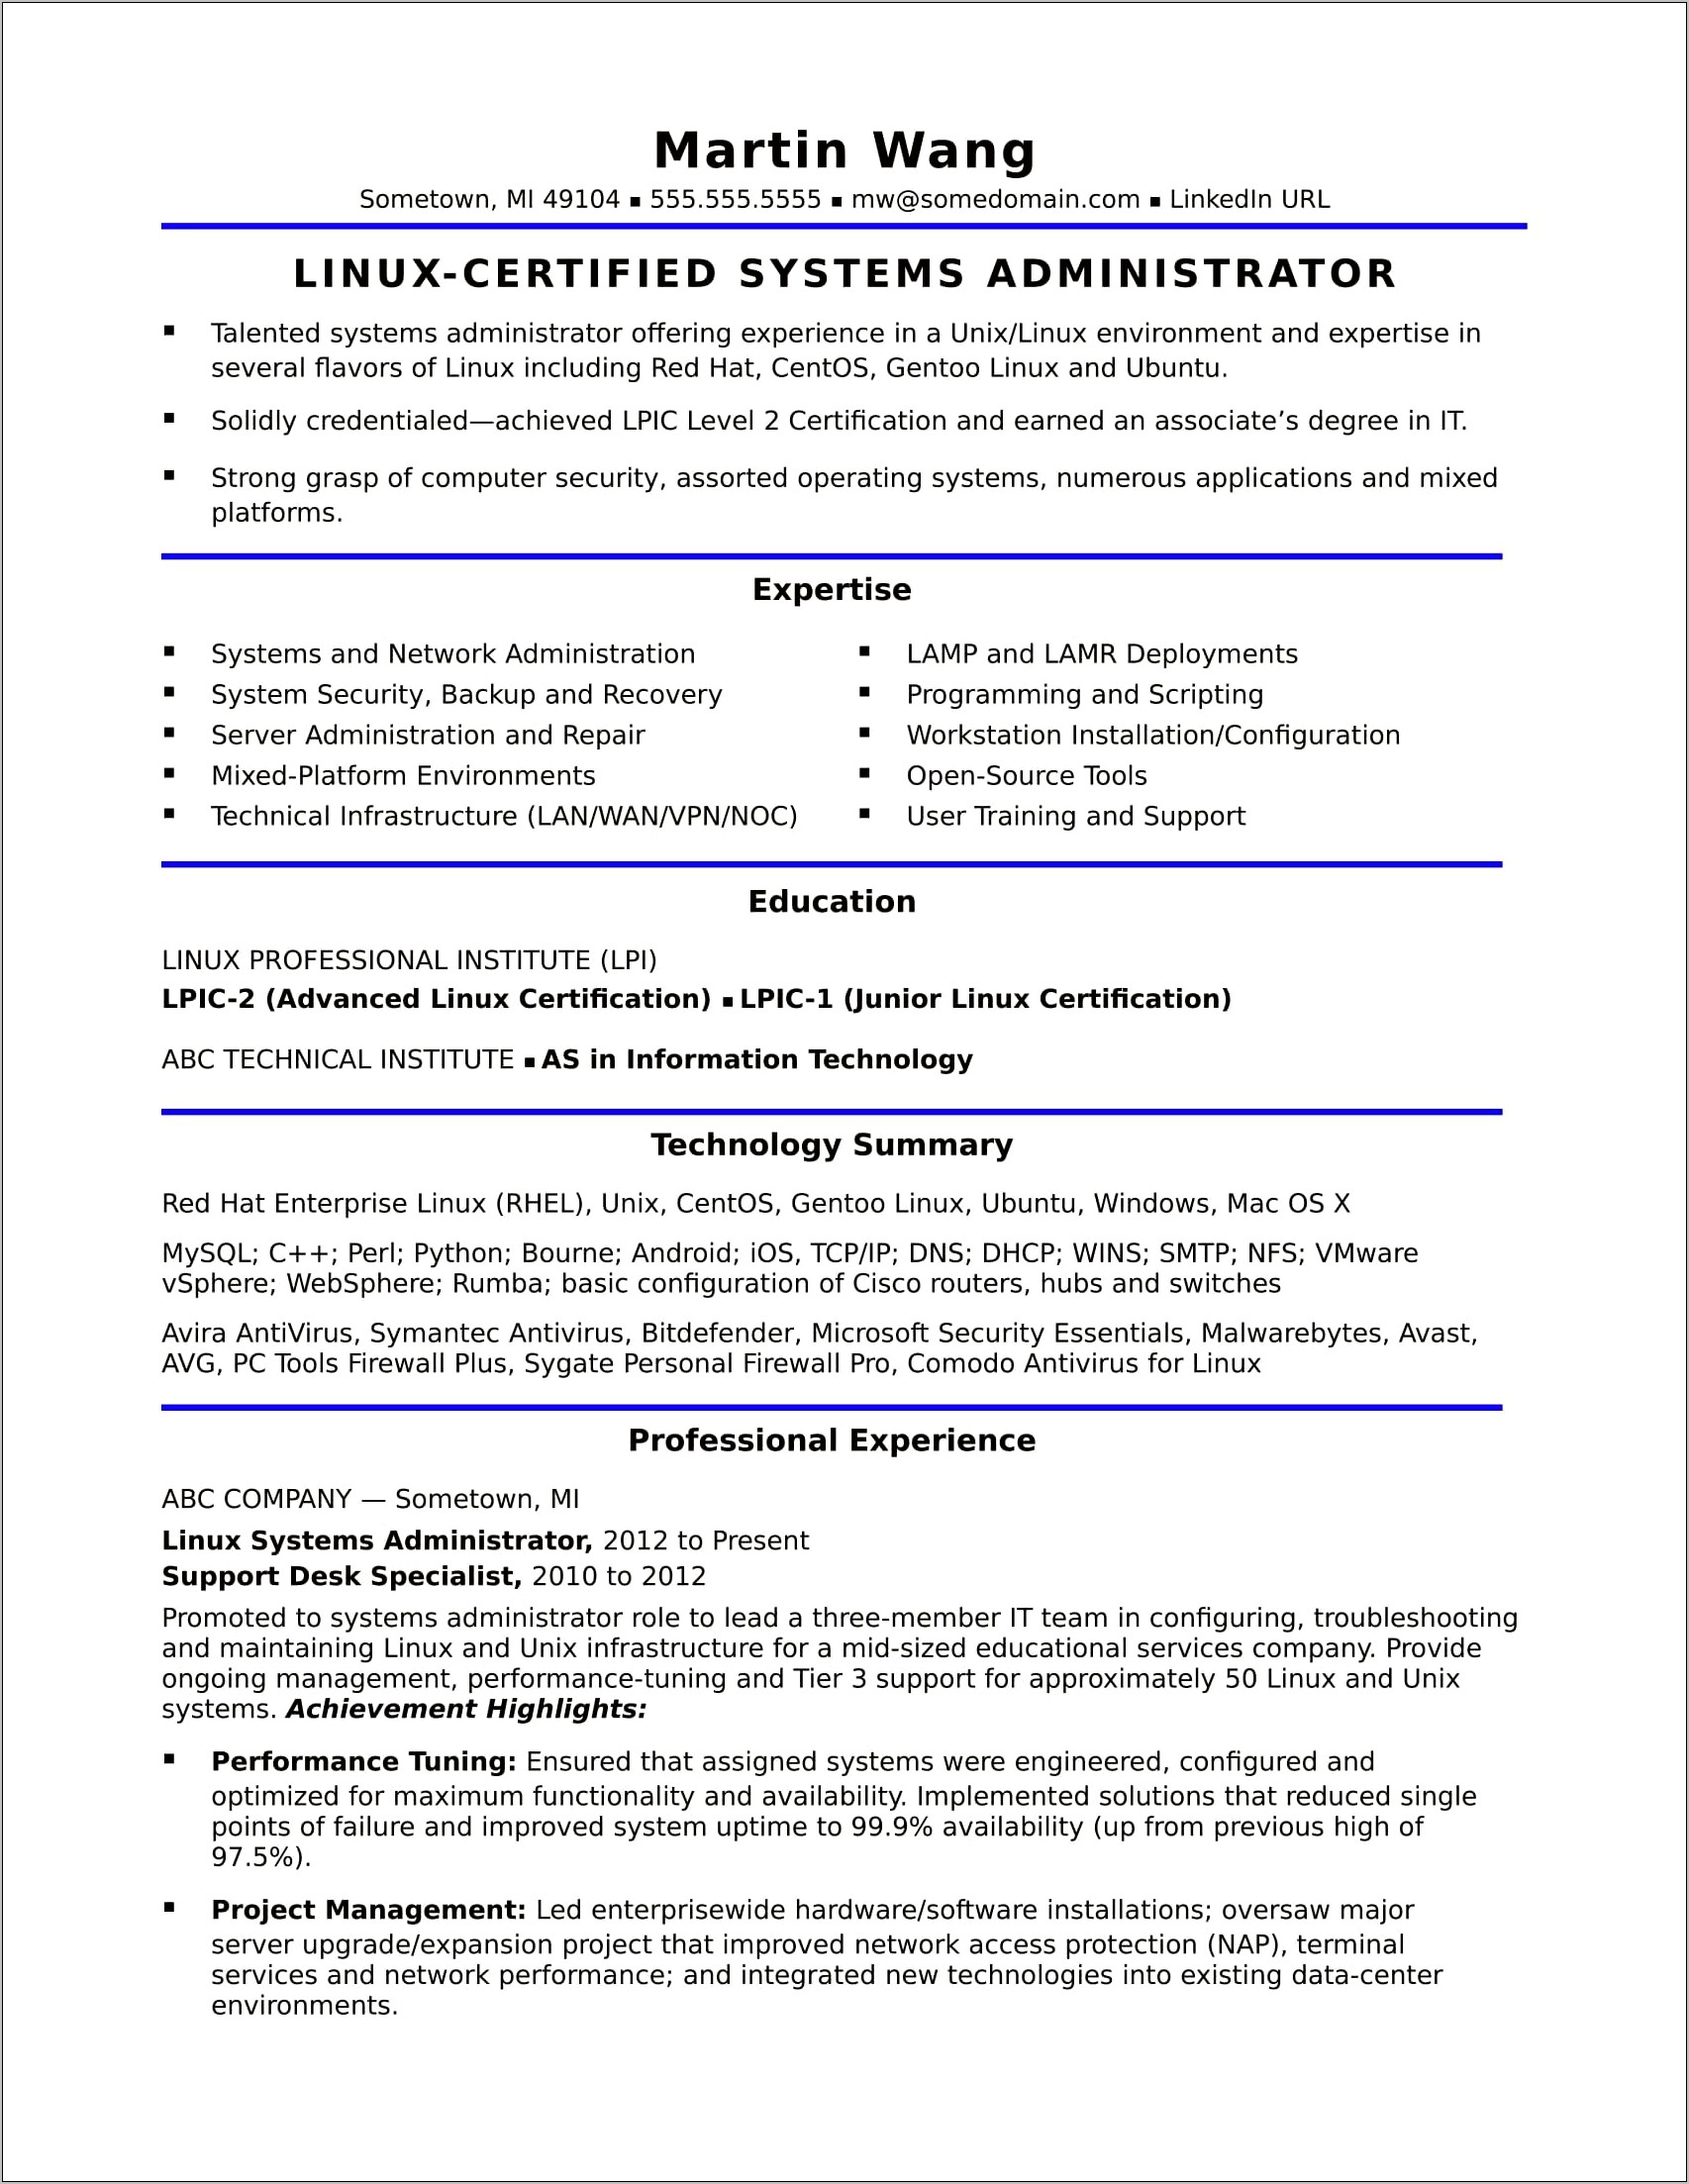 1 Year Experience Resume Format For Networking